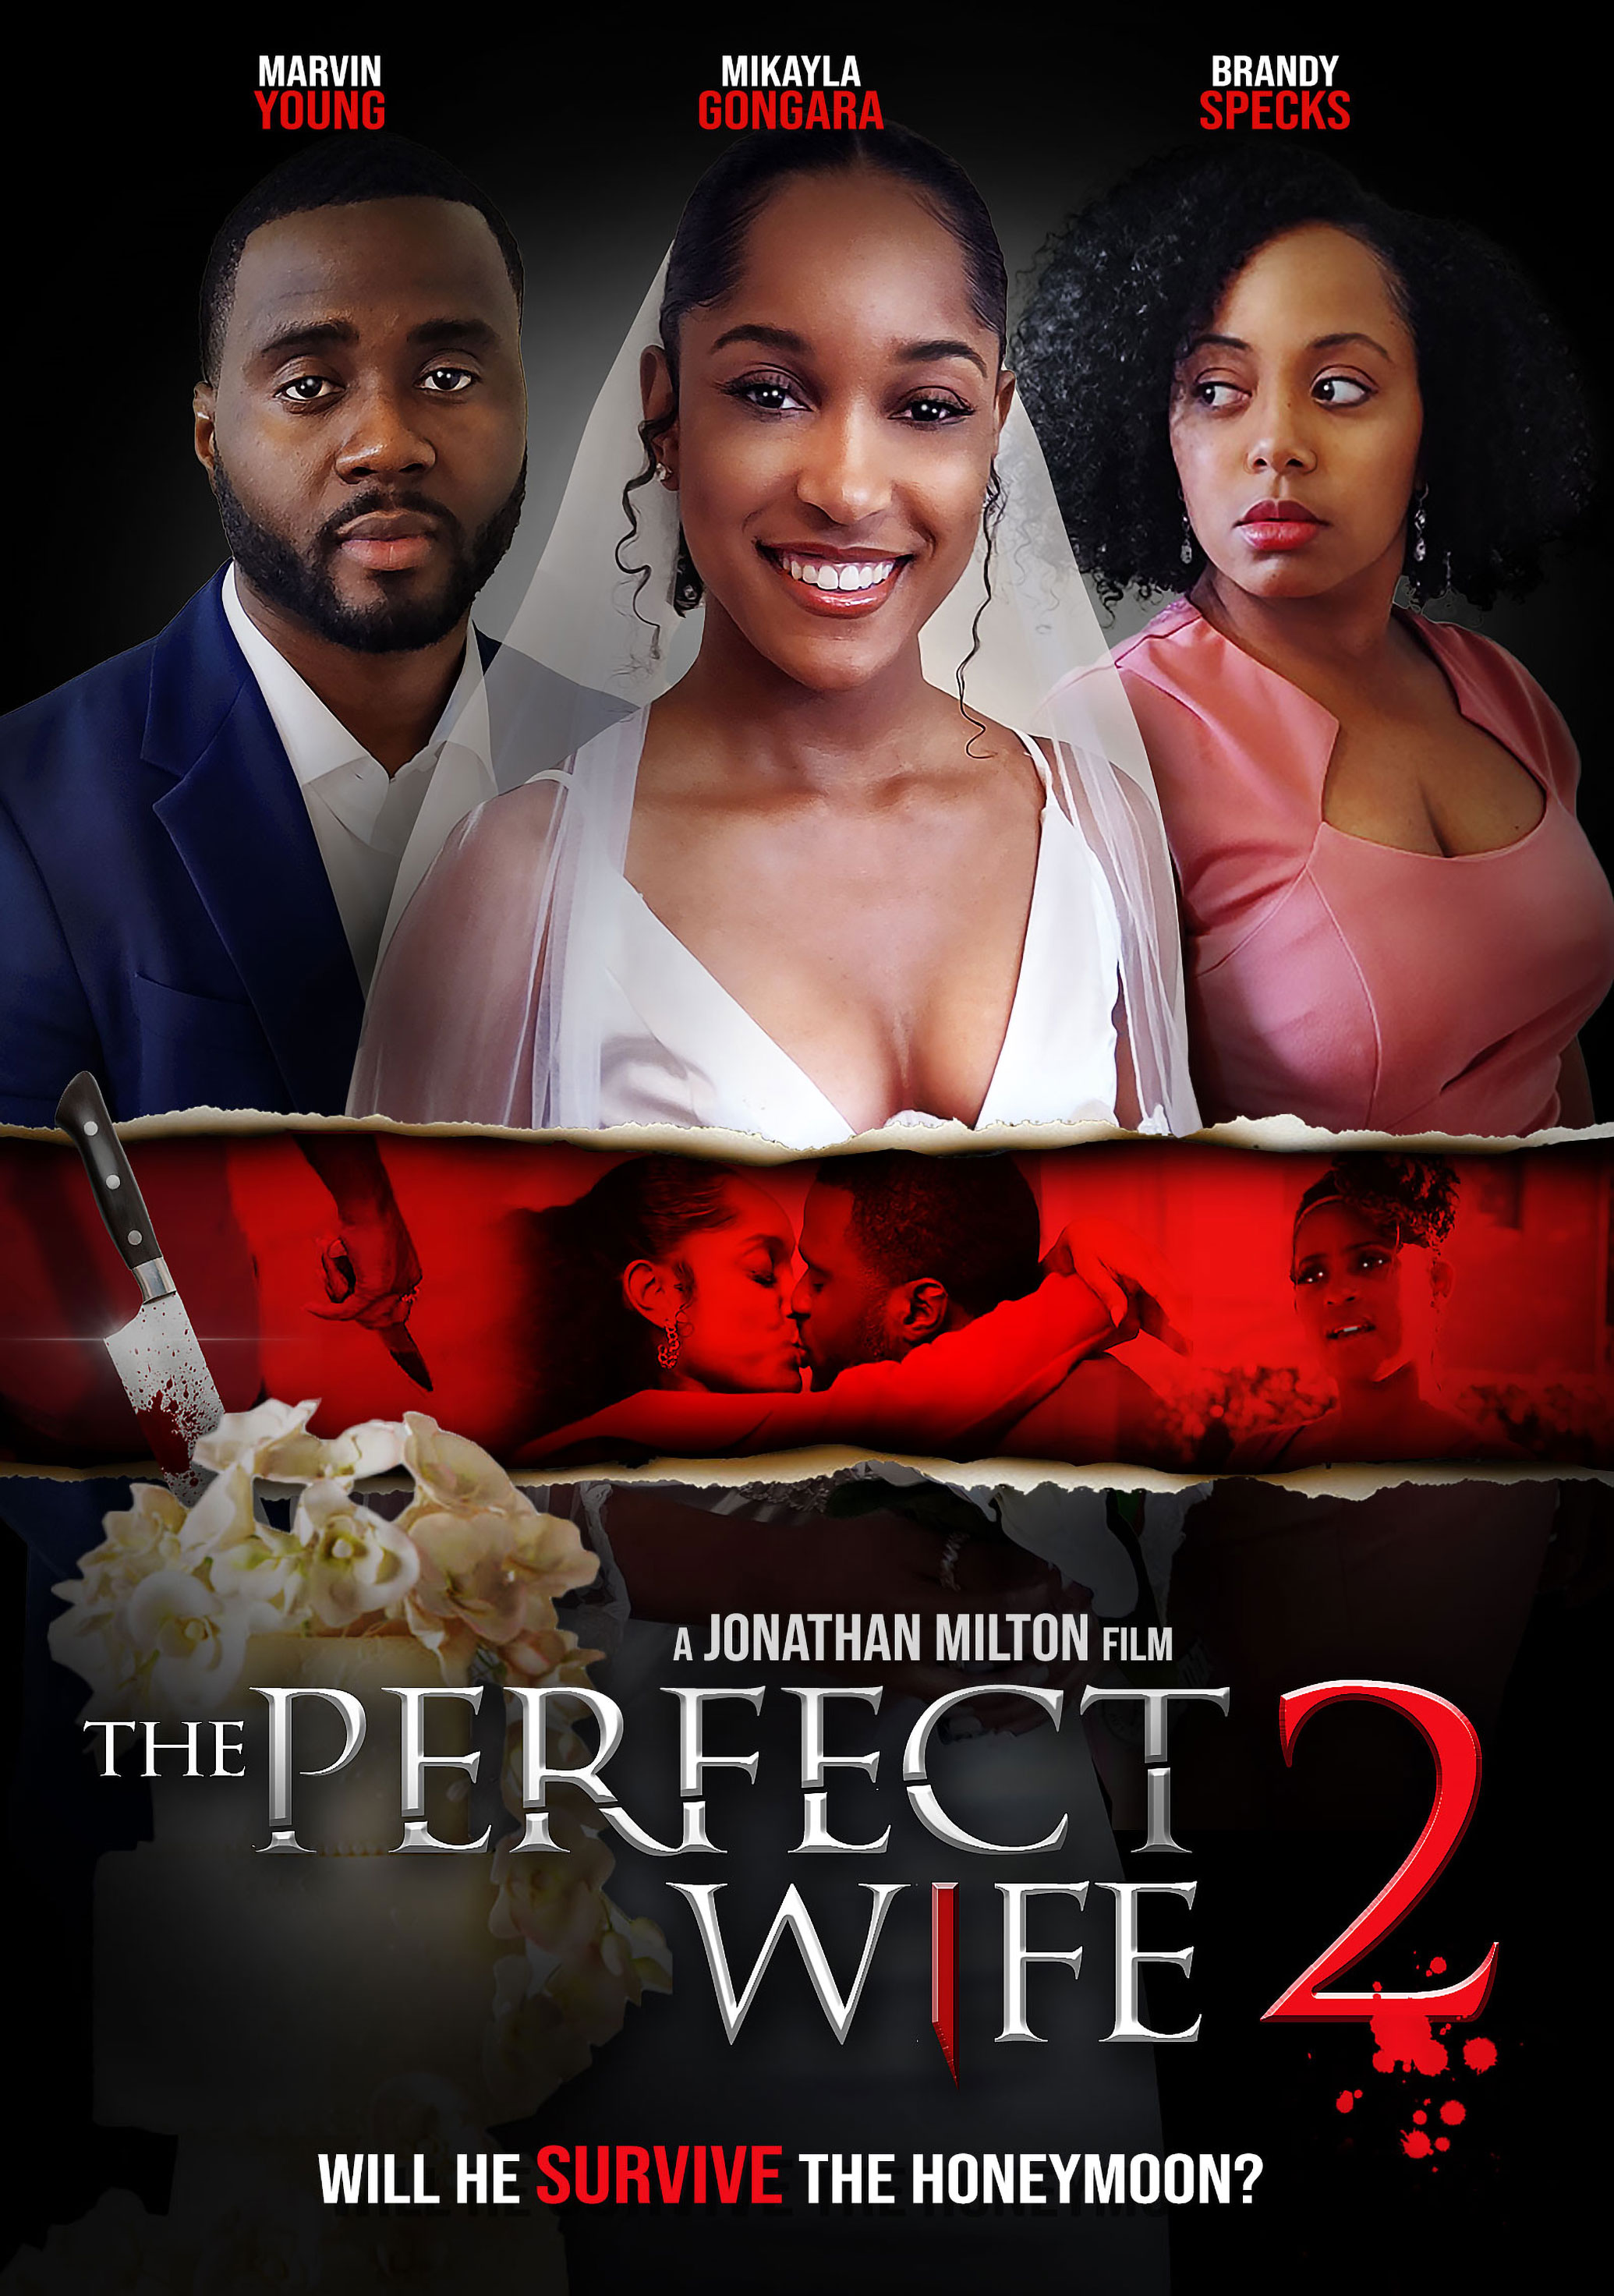 The Perfect Wife 2 (2021) Thriller, Directed By Jonathan Milton photo